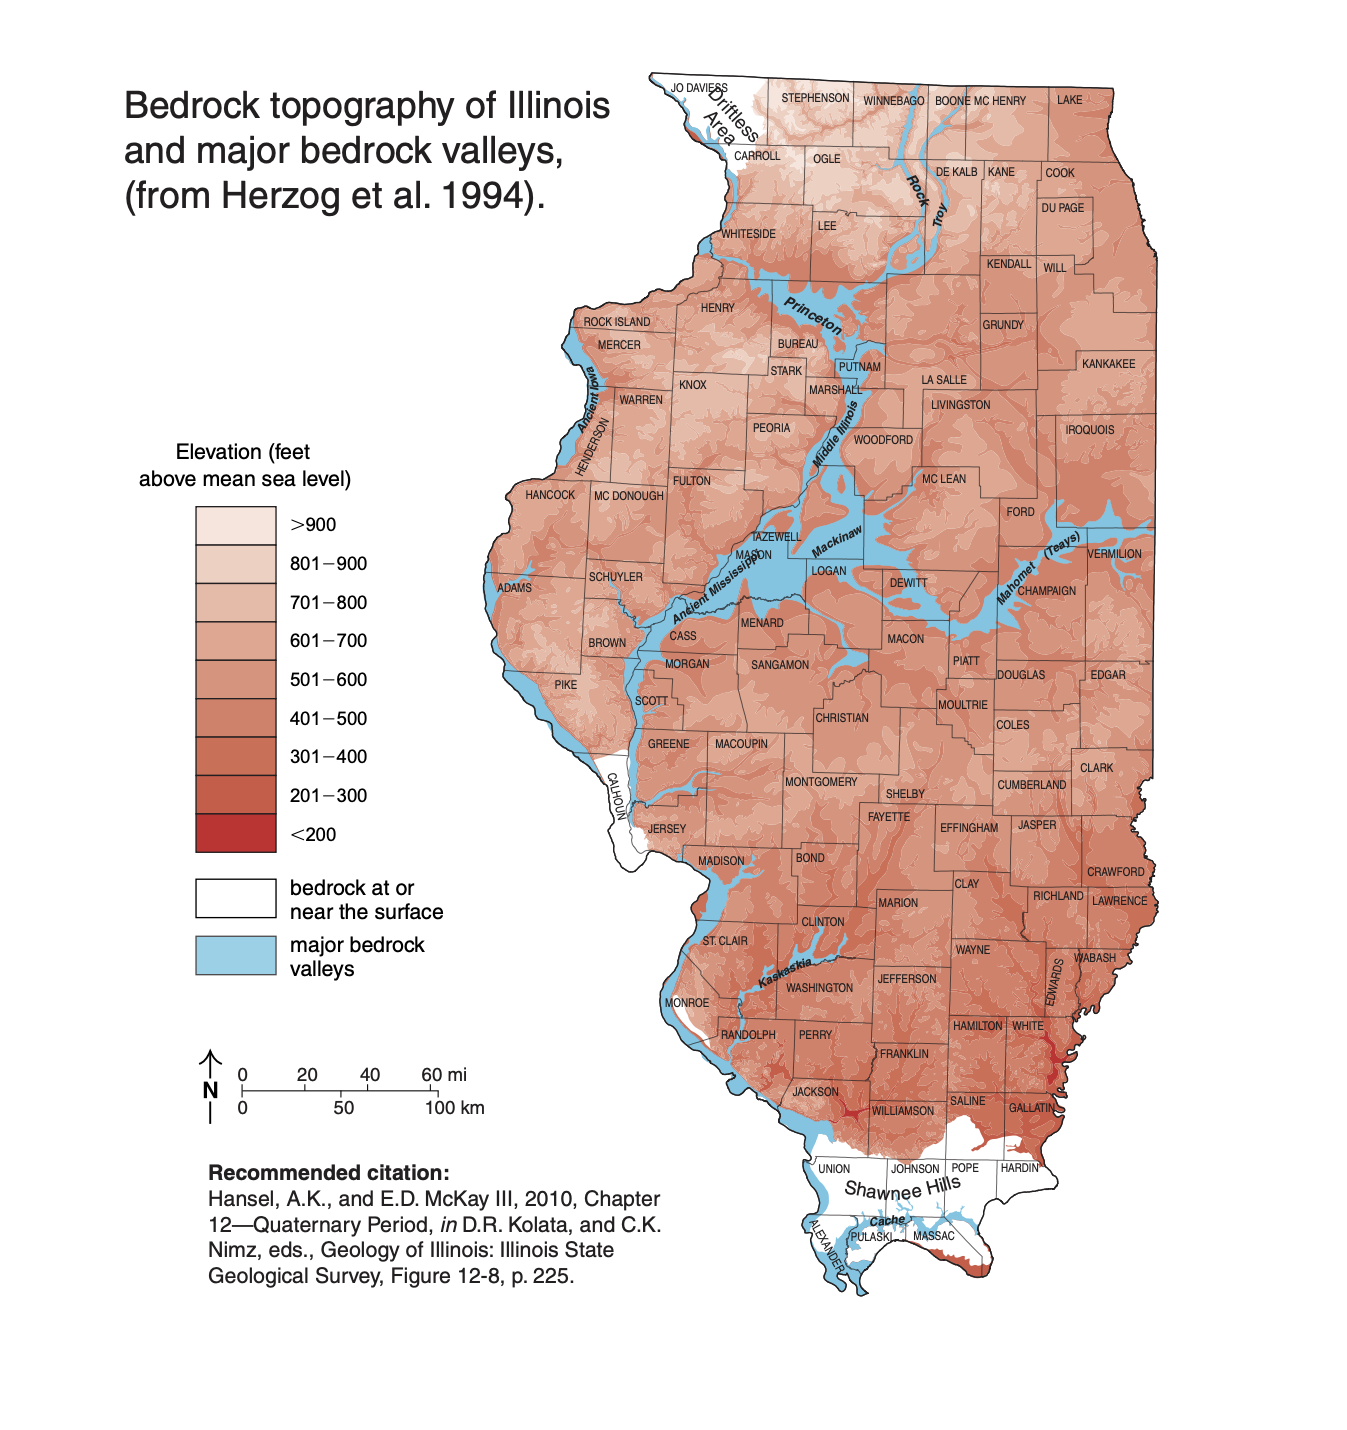 A map of the bedrock topography of Illinois and major bedrock valleys